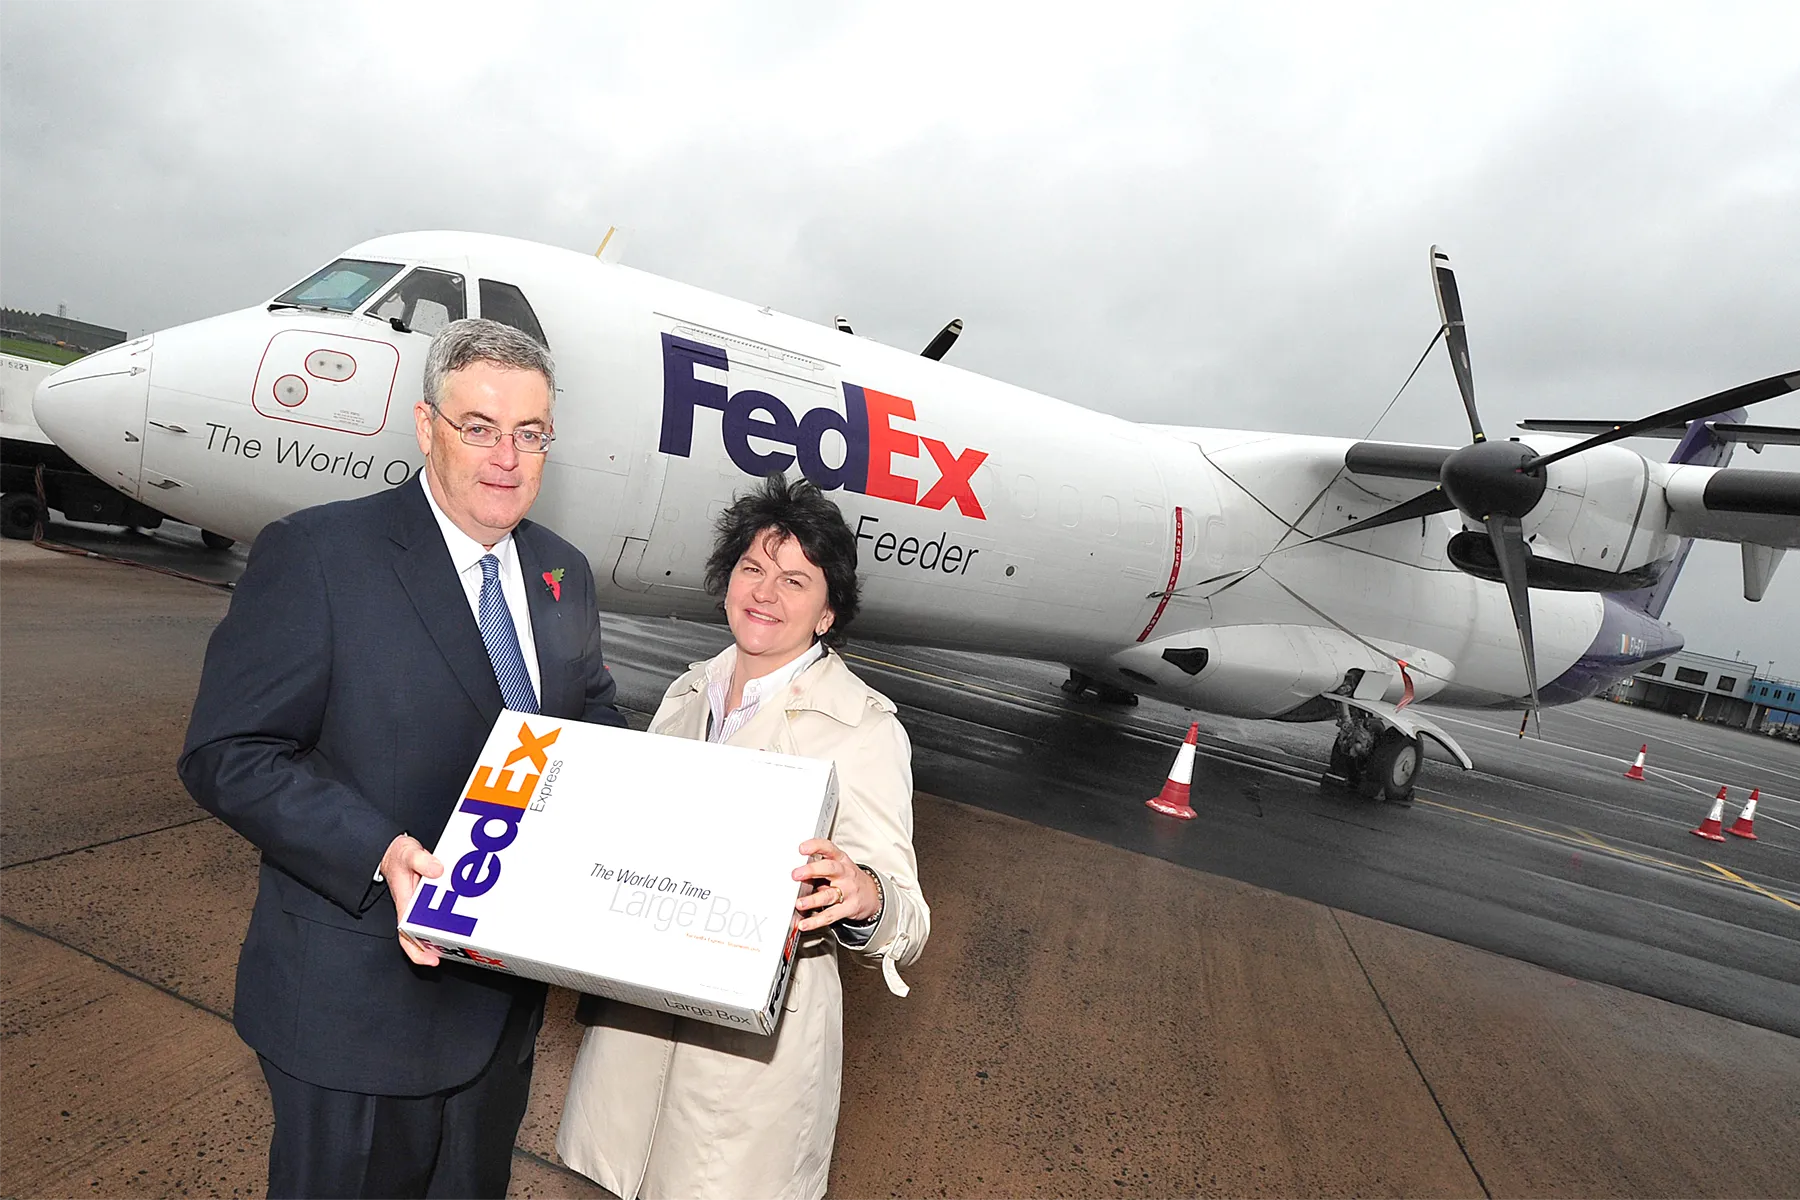 The new centre was officially opened on 8 November by Northern Ireland Assembly Minister for Enterprise, Trade and Investment, Arlene Foster, who said: “The availability of logistics companies such as FedEx is important for businesses seeking to win and having to service sales outside Northern Ireland. The presence of an internationally renowned company such as FedEx will add to our inward investment proposition and increase Northern Ireland’s attractiveness to potential investors.”